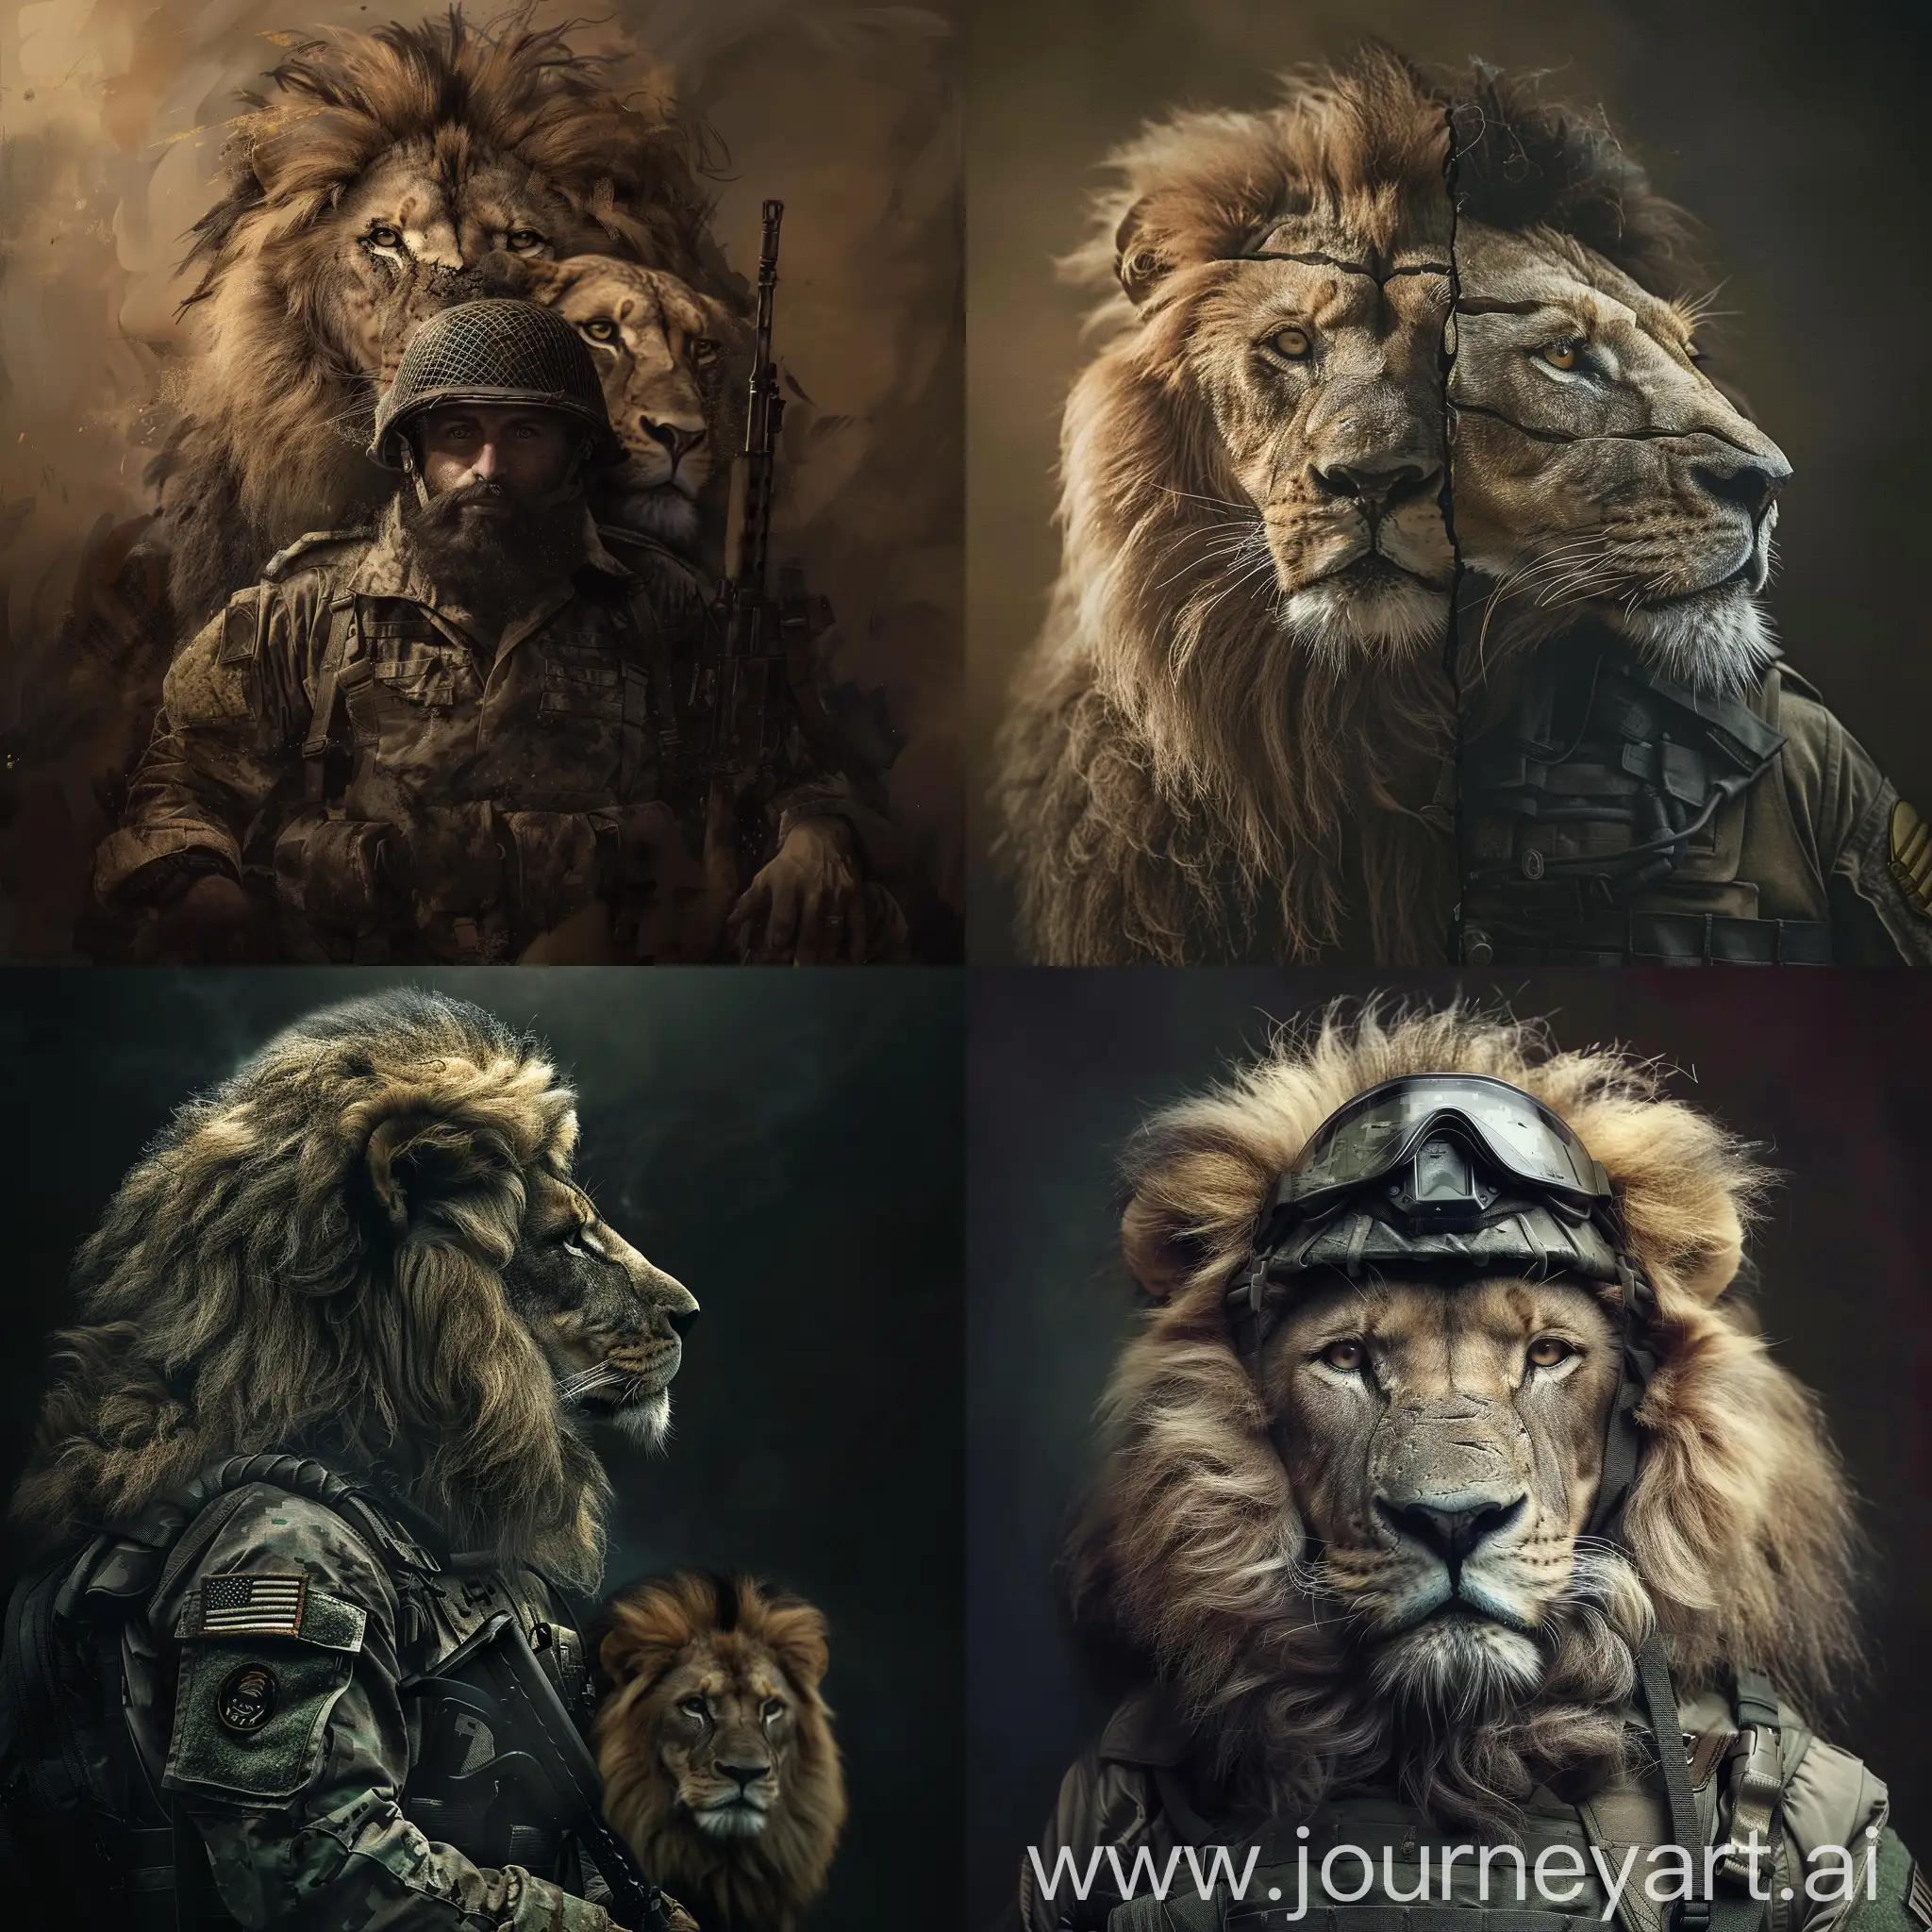 Majestic-Hybrid-Soldier-and-Lion-Art